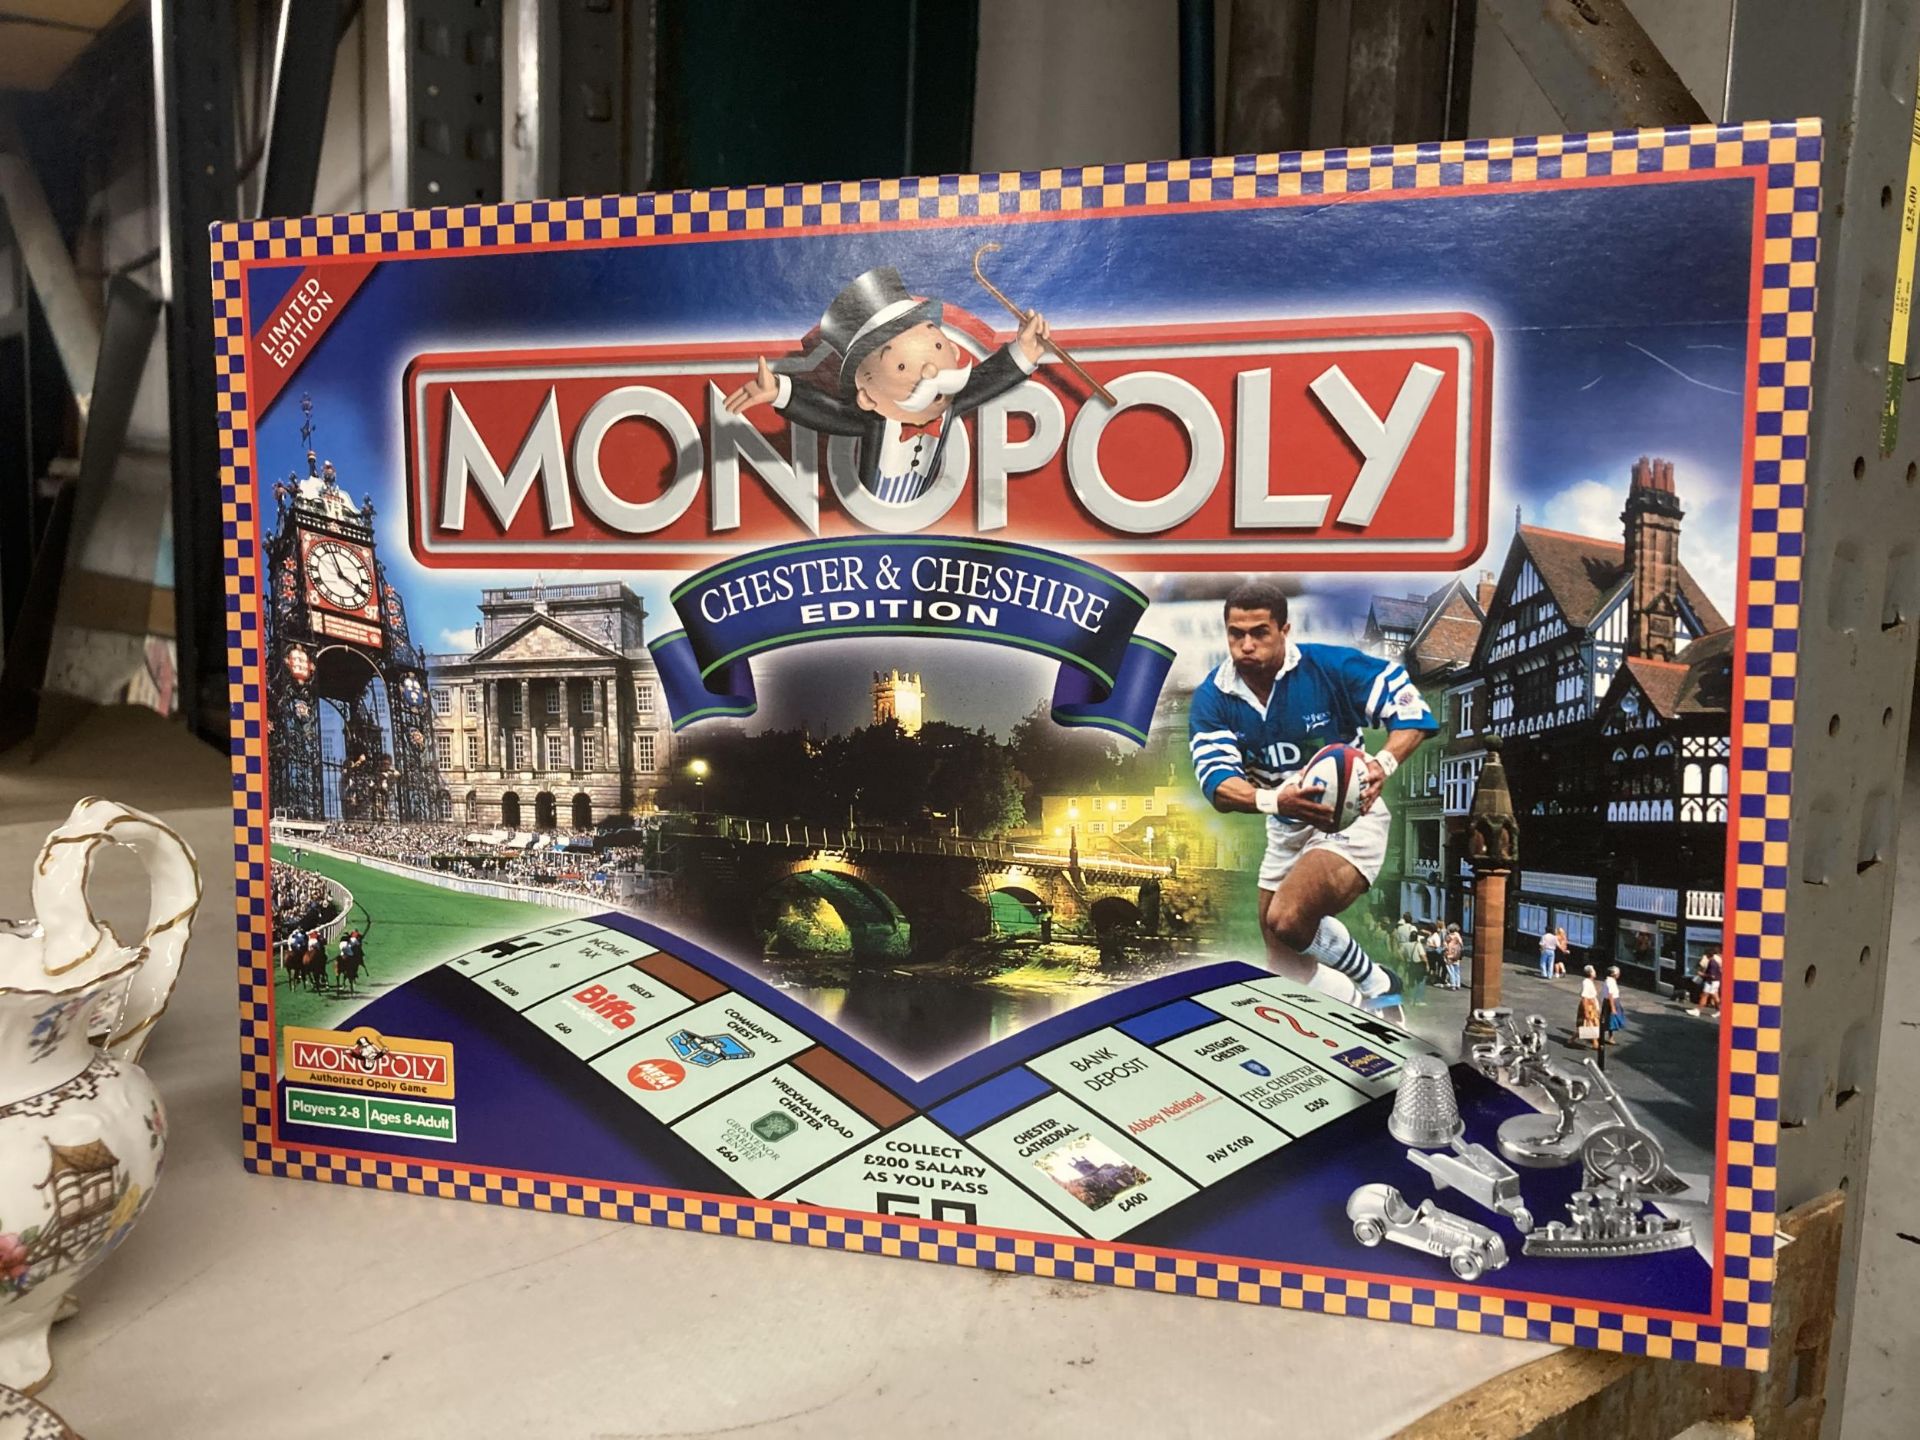 A CHESTER AND CHESHIRE EDITION MONOPOLY BOXED BOARD GAME